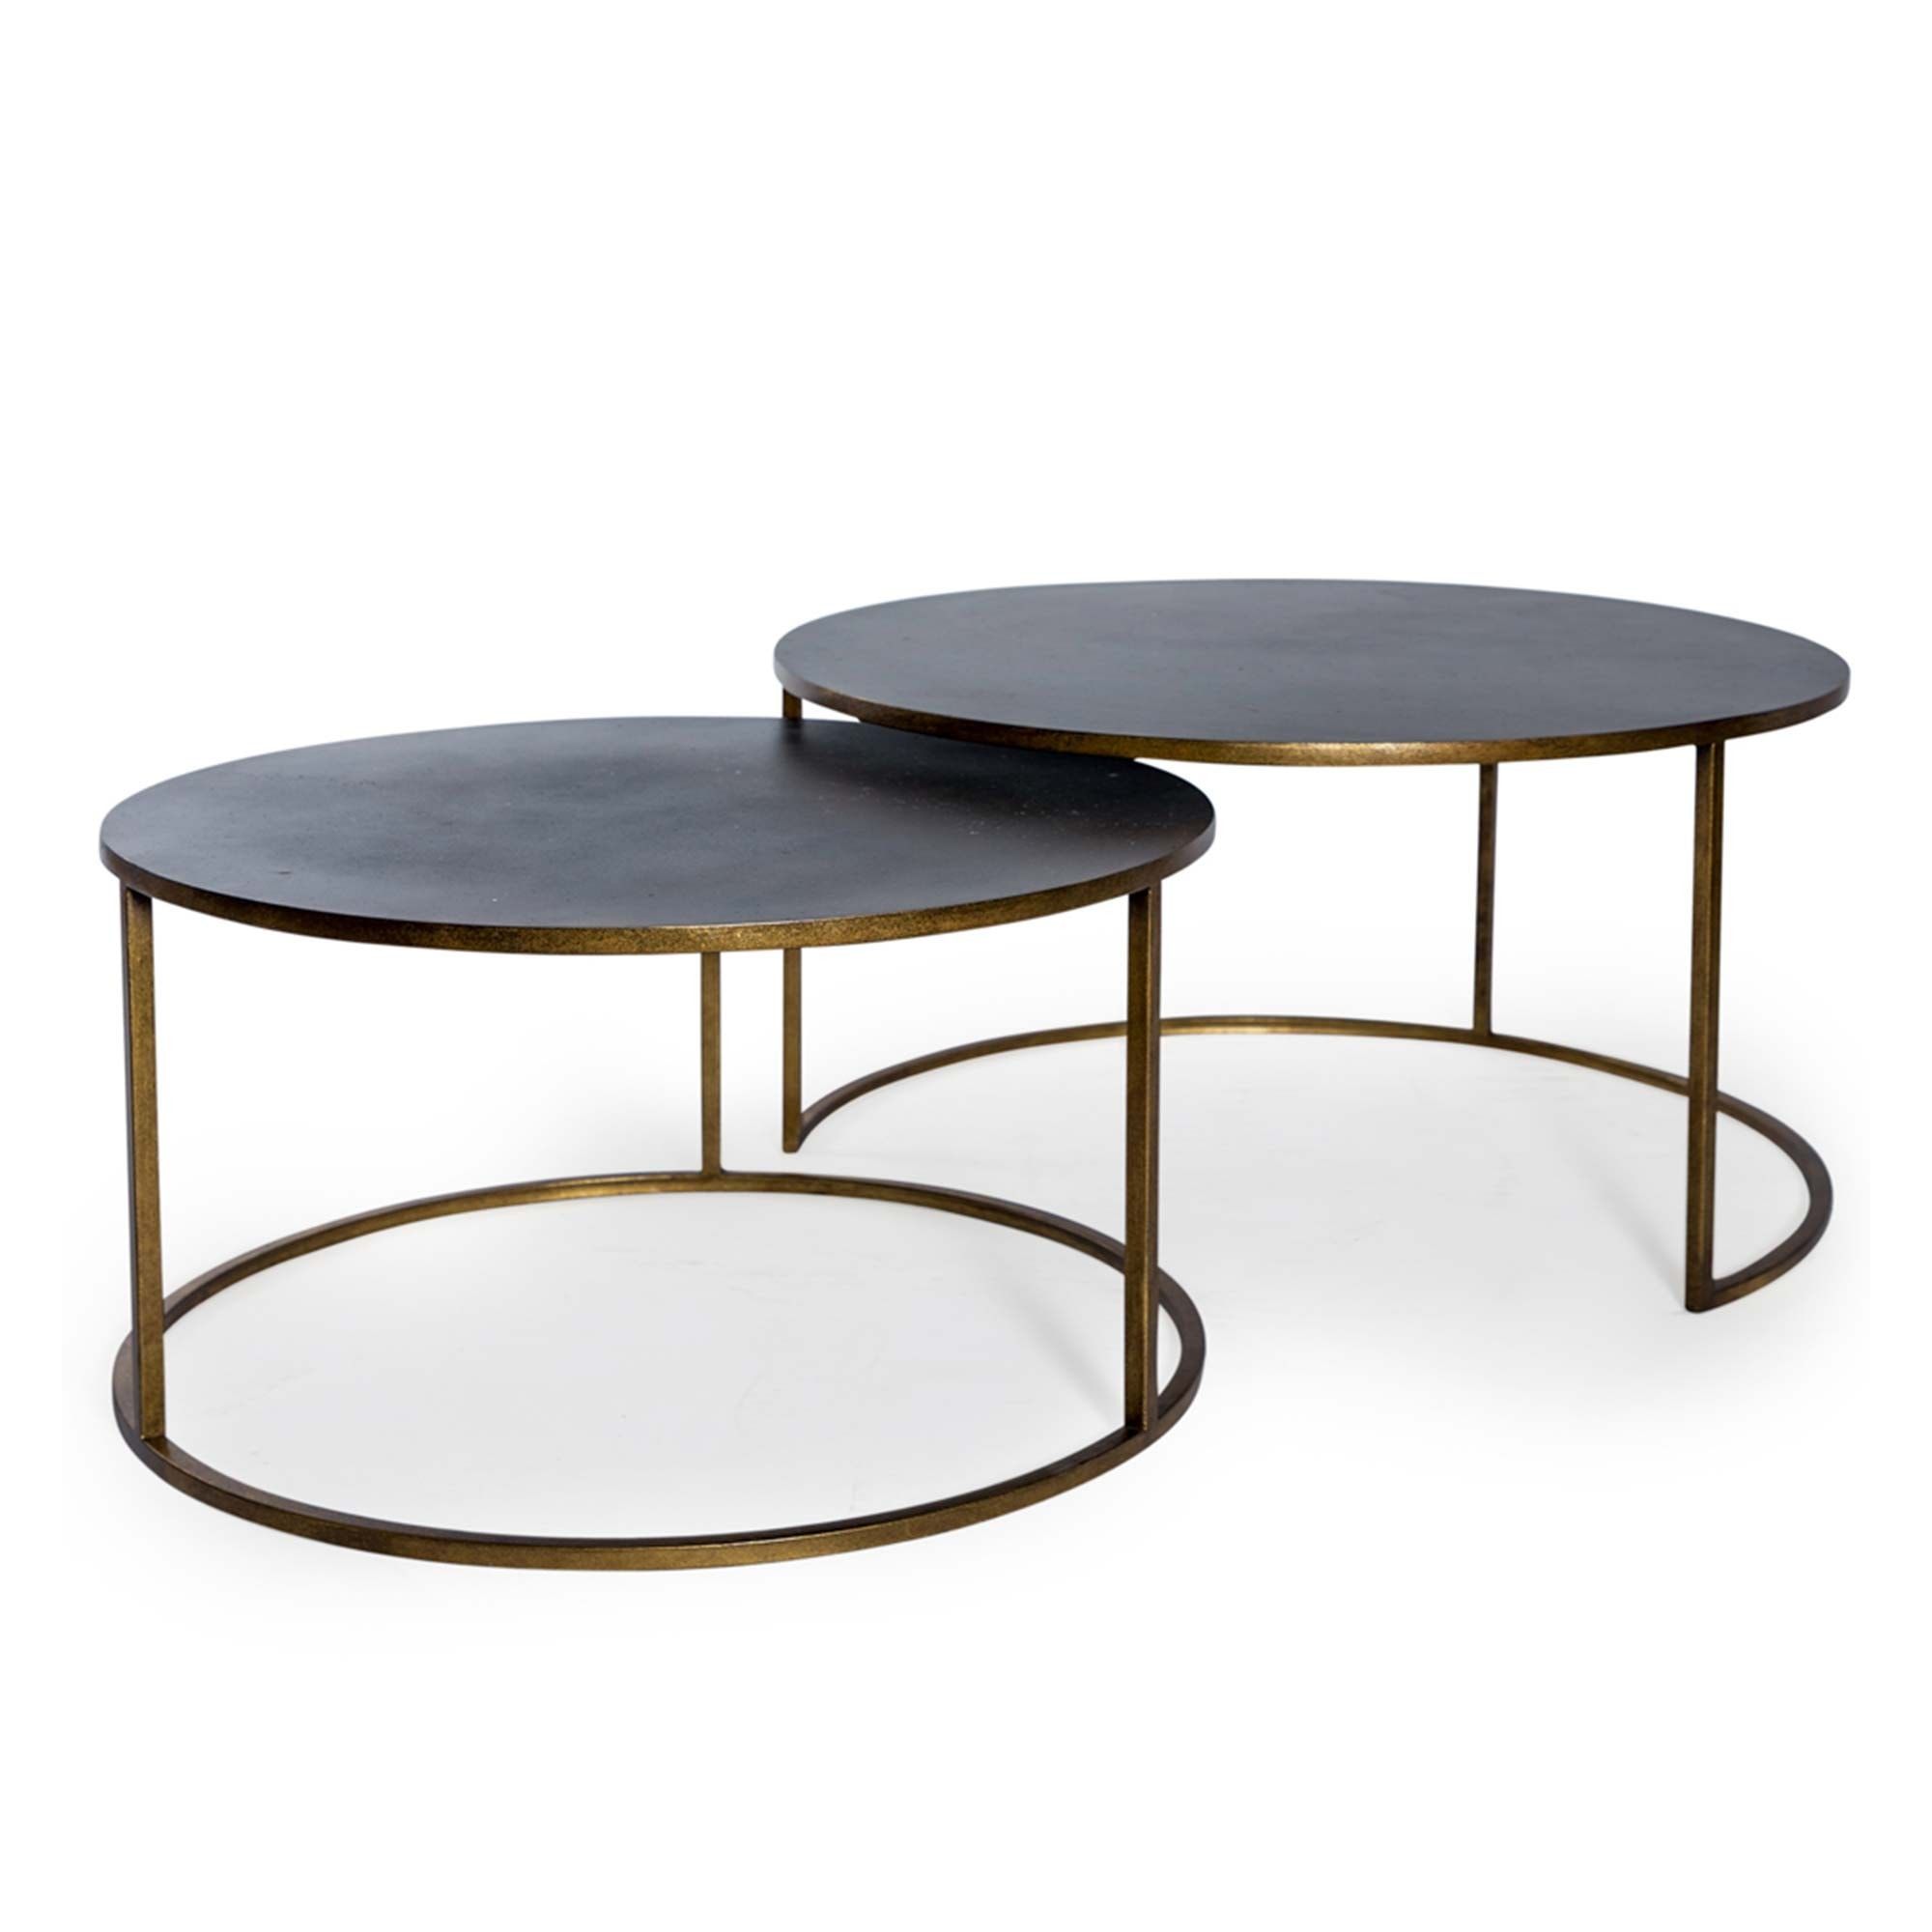 Nest Of 2 Antique Gold And Bronze Metal Coffee Tables | Nest Of Tables With Bronze Metal Coffee Tables (View 4 of 15)